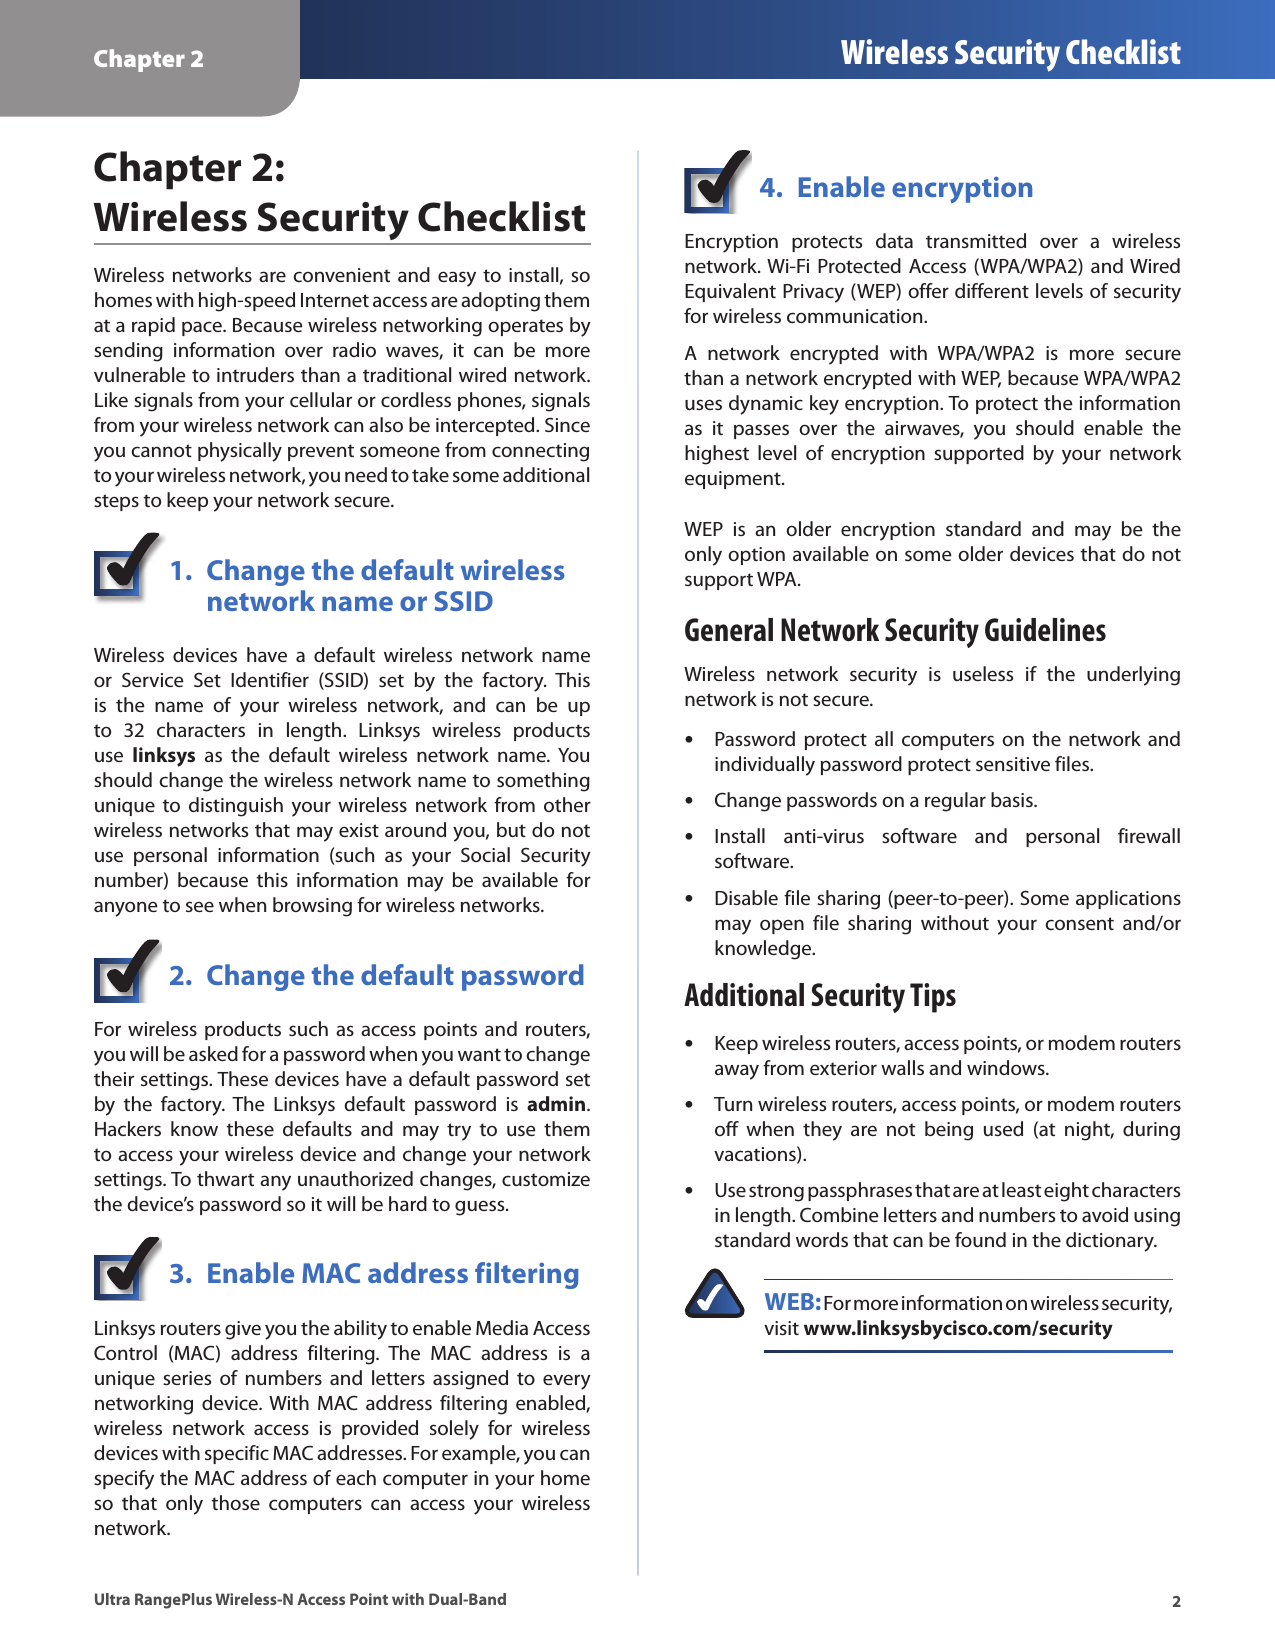 Chapter 2 Wireless Security Checklist2Ultra RangePlus Wireless-N Access Point with Dual-BandChapter 2:  Wireless Security ChecklistWireless  networks are convenient  and  easy to install, so homes with high-speed Internet access are adopting them at a rapid pace. Because wireless networking operates by sending  information  over  radio  waves,  it  can  be  more vulnerable to intruders than a traditional wired network. Like signals from your cellular or cordless phones, signals from your wireless network can also be intercepted. Since you cannot physically prevent someone from connecting to your wireless network, you need to take some additional steps to keep your network secure. 1.  Change the default wireless    network name or SSIDWireless  devices  have  a  default  wireless  network  name or  Service  Set  Identifier  (SSID)  set  by  the  factory.  This is  the  name  of  your  wireless  network,  and  can  be  up to  32  characters  in  length.  Linksys  wireless  products use  linksys  as  the  default  wireless  network  name.  You should change the wireless network name to something unique  to distinguish  your wireless  network from  other wireless networks that may exist around you, but do not use  personal  information  (such  as  your  Social  Security number)  because  this  information  may  be  available  for anyone to see when browsing for wireless networks. 2.  Change the default passwordFor wireless products such as access points and routers, you will be asked for a password when you want to change their settings. These devices have a default password set by  the  factory.  The  Linksys  default  password  is  admin. Hackers  know  these  defaults  and  may  try  to  use  them to access your wireless device and change your network settings. To thwart any unauthorized changes, customize the device’s password so it will be hard to guess.3.  Enable MAC address filteringLinksys routers give you the ability to enable Media Access Control  (MAC)  address  filtering.  The  MAC  address  is  a unique  series  of  numbers  and  letters  assigned  to  every networking  device. With  MAC  address filtering  enabled, wireless  network  access  is  provided  solely  for  wireless devices with specific MAC addresses. For example, you can specify the MAC address of each computer in your home so  that  only  those  computers  can  access  your  wireless network. 4.  Enable encryptionEncryption  protects  data  transmitted  over  a  wireless network. Wi-Fi Protected  Access (WPA/WPA2) and Wired Equivalent Privacy (WEP) offer different levels of security for wireless communication.A  network  encrypted  with  WPA/WPA2  is  more  secure than a network encrypted with WEP, because WPA/WPA2 uses dynamic key encryption. To protect the information as  it  passes  over  the  airwaves,  you  should  enable  the highest  level  of  encryption  supported  by  your  network equipment. WEP  is  an  older  encryption  standard  and  may  be  the only option available on some older devices that do not support WPA.General Network Security GuidelinesWireless  network  security  is  useless  if  the  underlying network is not secure.  •Password protect  all computers on  the network  and individually password protect sensitive files. •Change passwords on a regular basis. •Install  anti-virus  software  and  personal  firewall software. •Disable file sharing (peer-to-peer). Some applications may  open  file  sharing  without  your  consent  and/or knowledge.Additional Security Tips •Keep wireless routers, access points, or modem routers away from exterior walls and windows. •Turn wireless routers, access points, or modem routers off  when  they  are  not  being  used  (at  night,  during vacations). •Use strong passphrases that are at least eight characters in length. Combine letters and numbers to avoid using standard words that can be found in the dictionary. WEB: For more information on wireless security, visit www.linksysbycisco.com/security